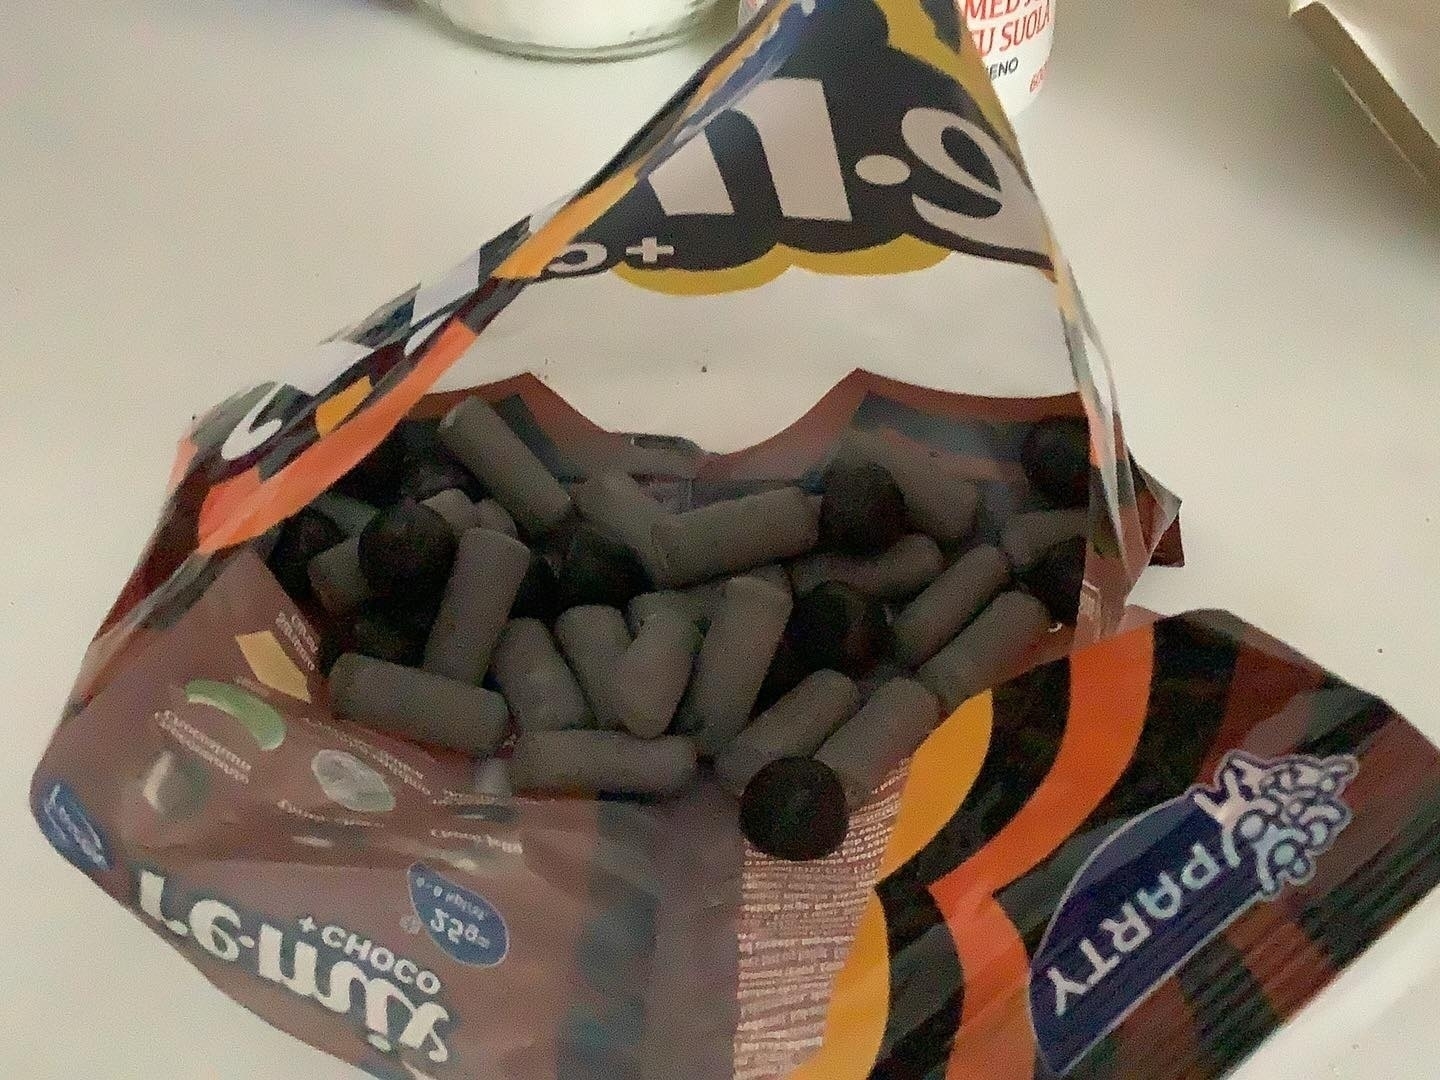 bag of candy that is just liquorice